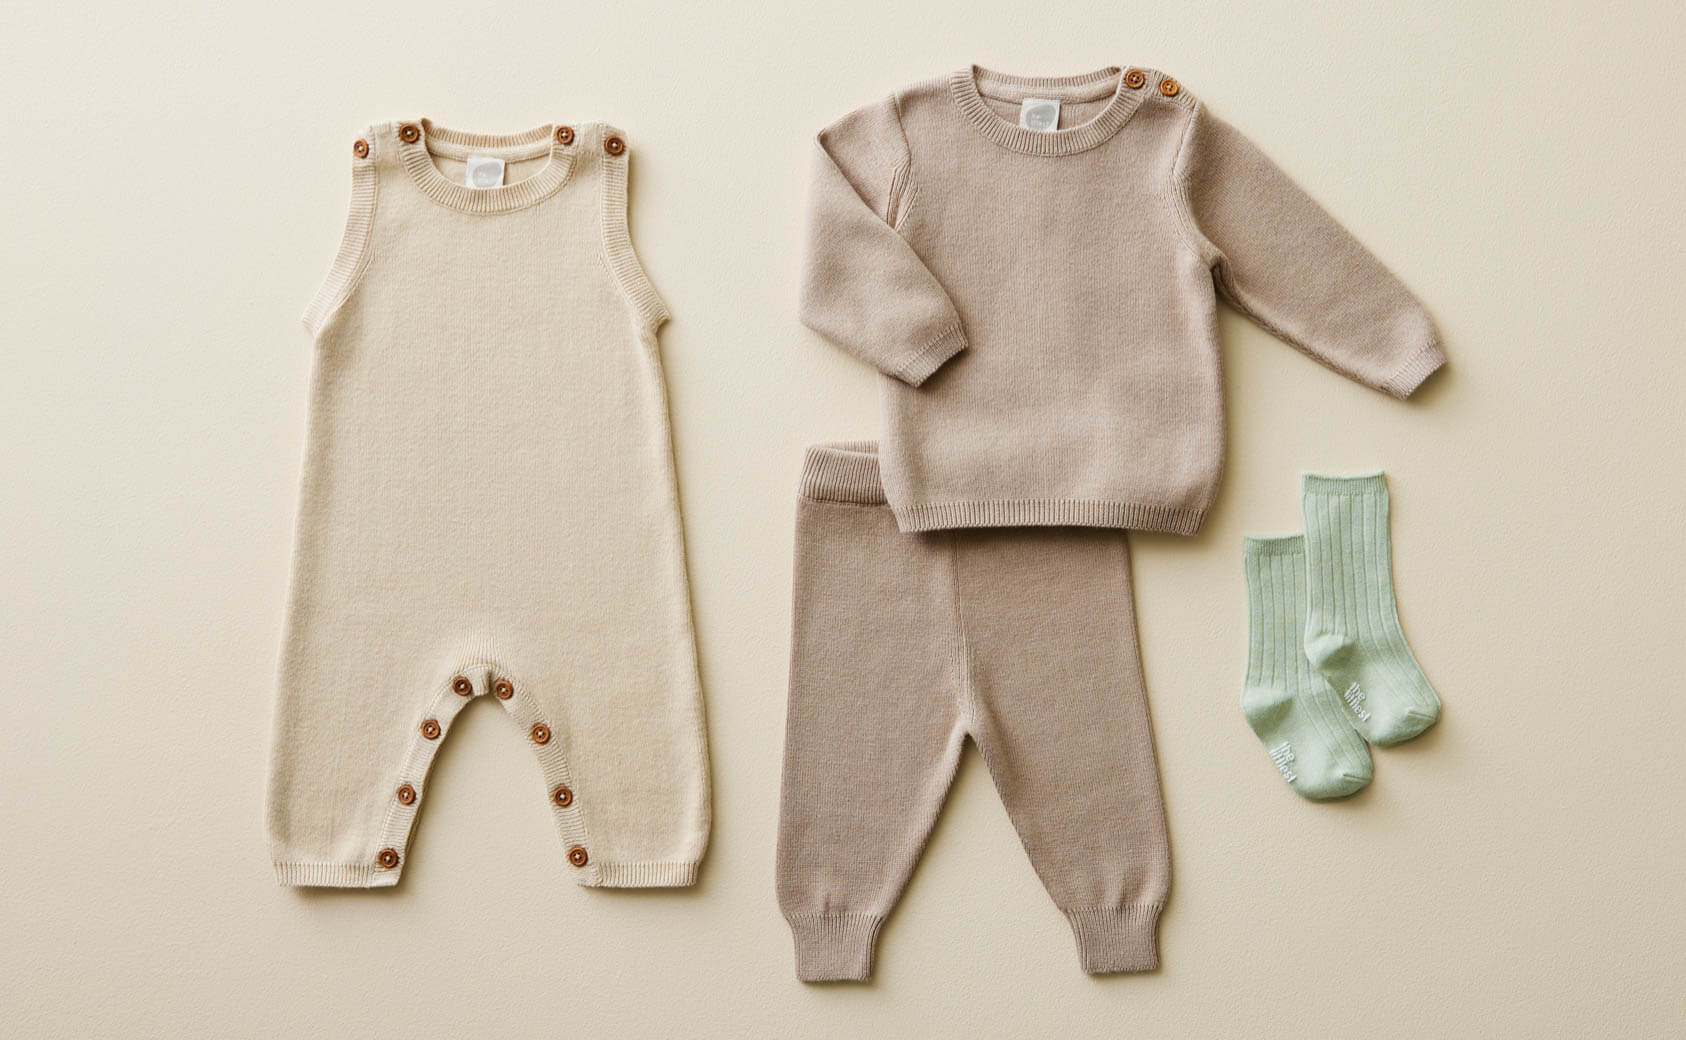 the littlest - Our exclusive line of sustainable accessories and clothing designed to keep baby comfortable and cozy.